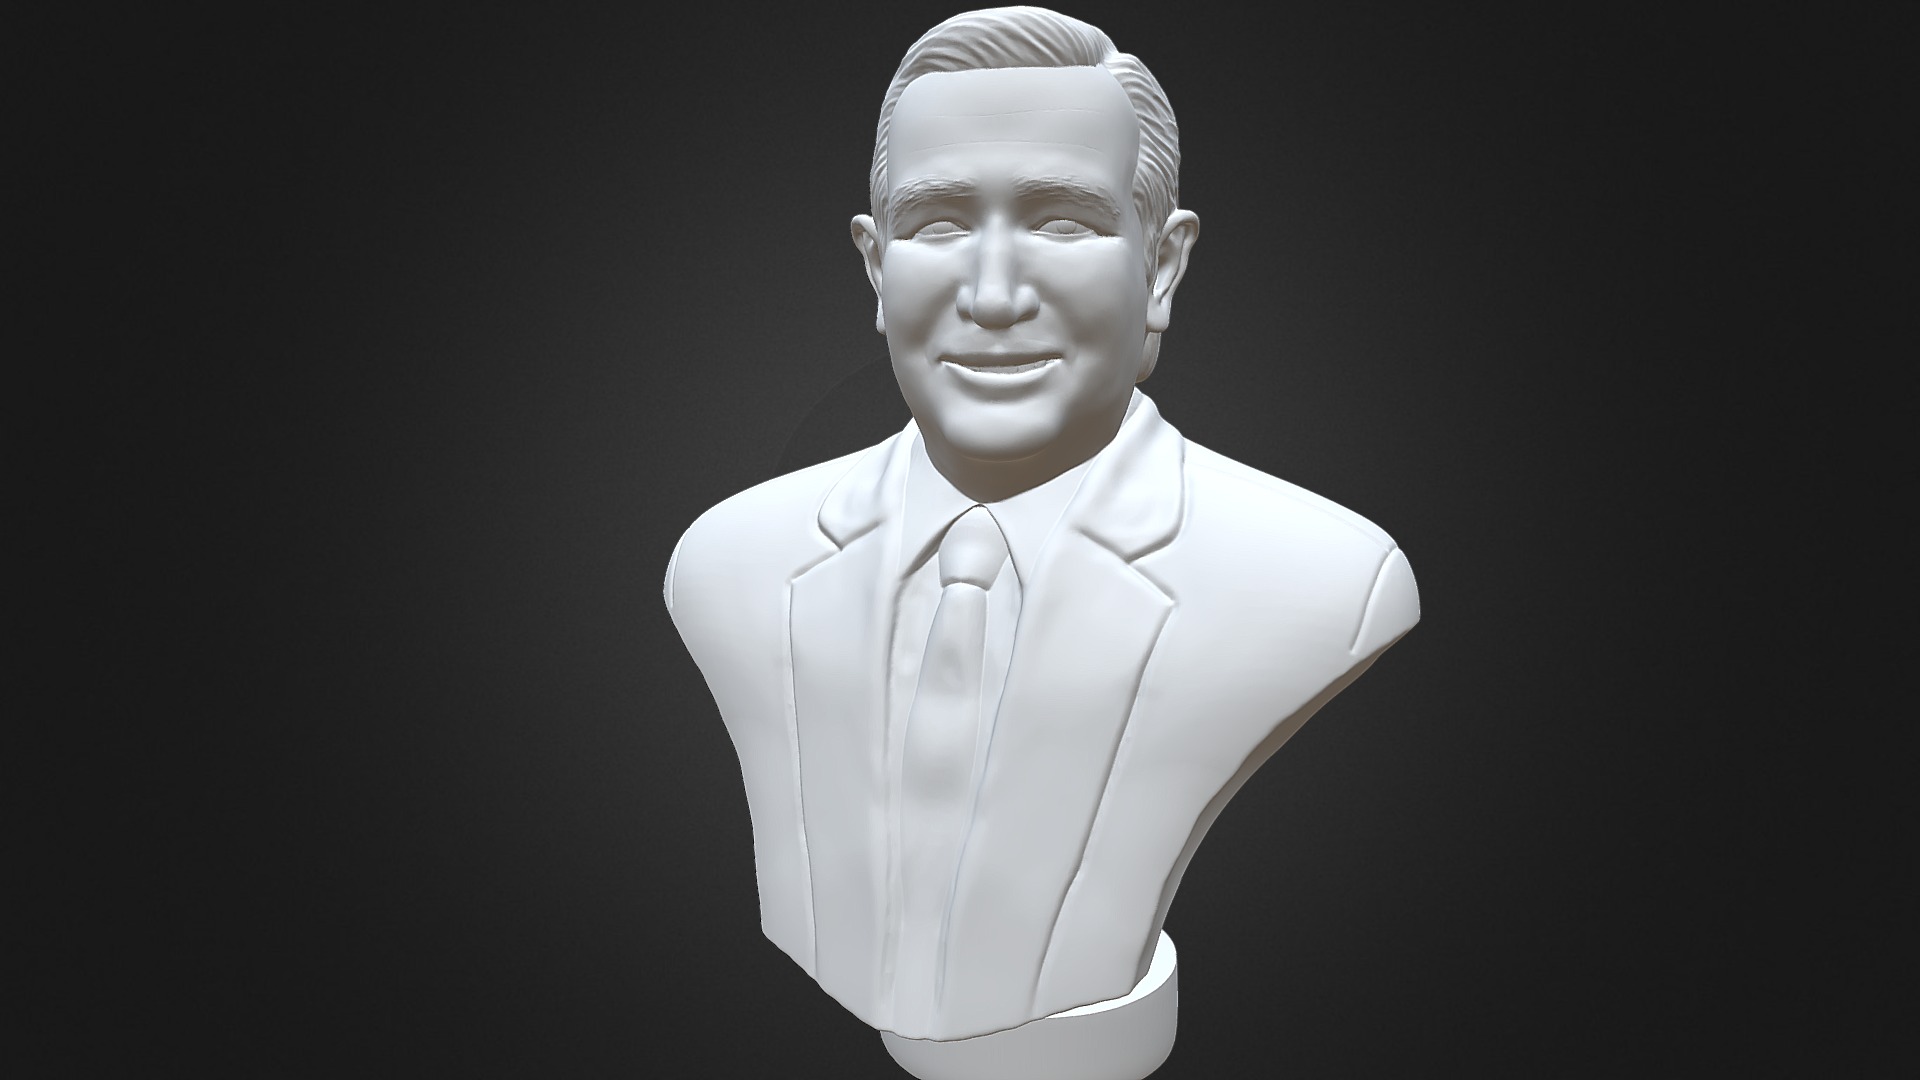 3D model Ted Cruz 3D printable portrait - This is a 3D model of the Ted Cruz 3D printable portrait. The 3D model is about a man wearing a white shirt.